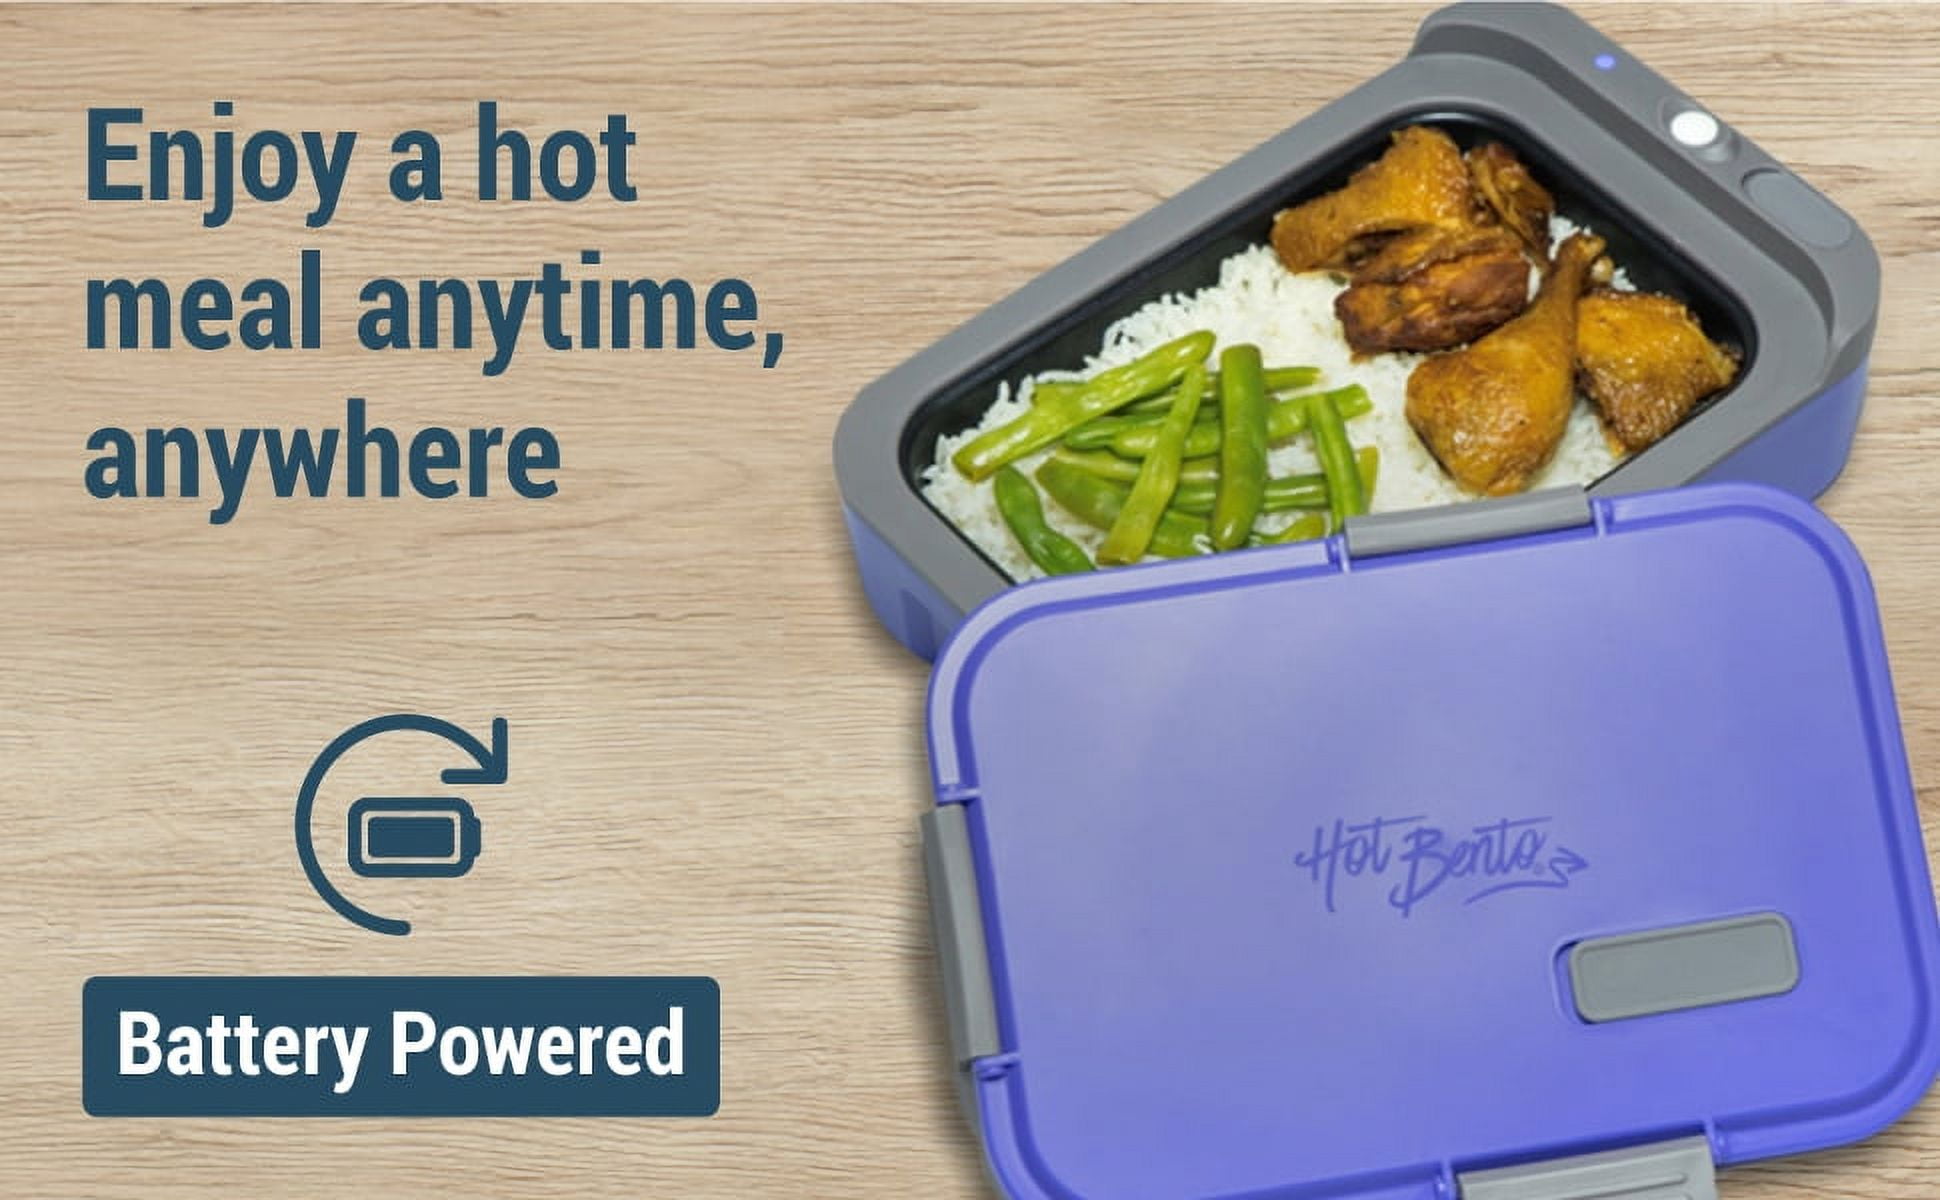  Hot Bento – Self Heated Lunch Box and Food Warmer – Battery  Powered, Portable, Cordless, Hot Meals for Office, Travel, Jobsite,  Picnics, Outdoor Recreation, Kitchen Meal Prep (Powder Blue): Home 